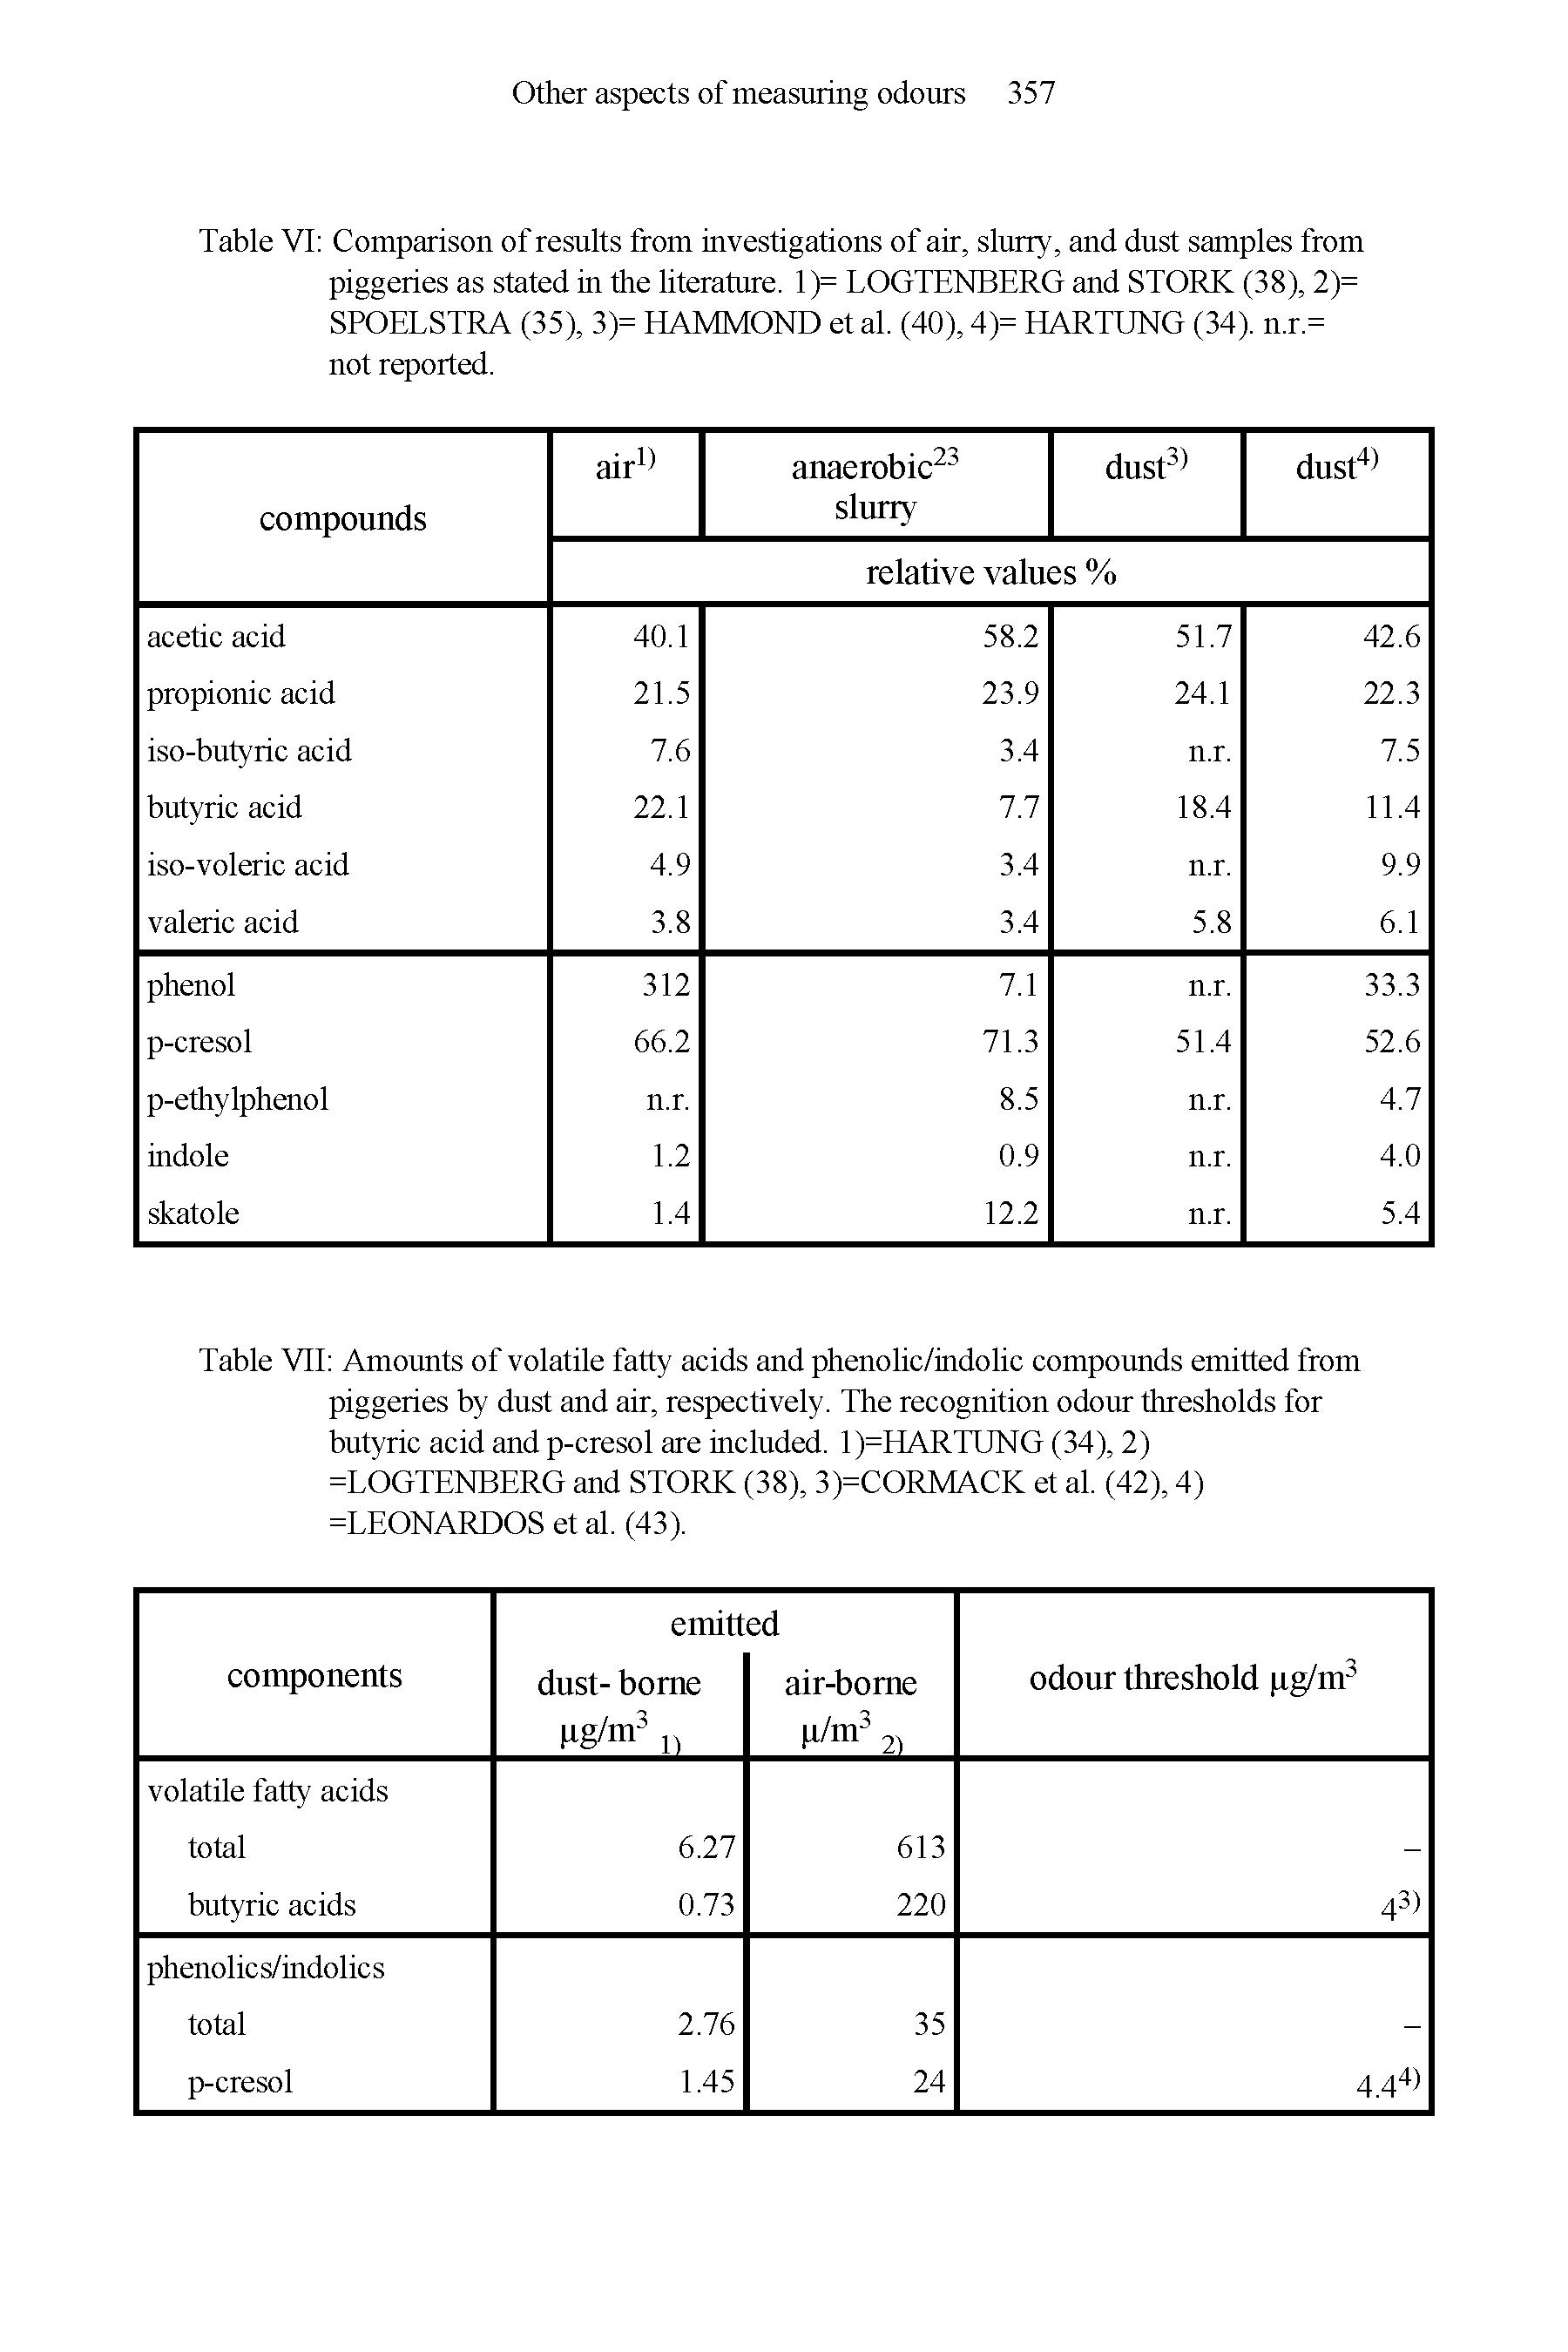 Table VII Amounts of volatile fatty acids and phenolic/indolic compounds emitted from piggeries by dust and air, respectively. The recognition odour thresholds for butyric acid and p-cresol are included. 1)=HARTUNG (34), 2) =LOGTENBERG and STORK (38), 3)=CORMACK et al. (42), 4) =LEONARDOS et al. (43).